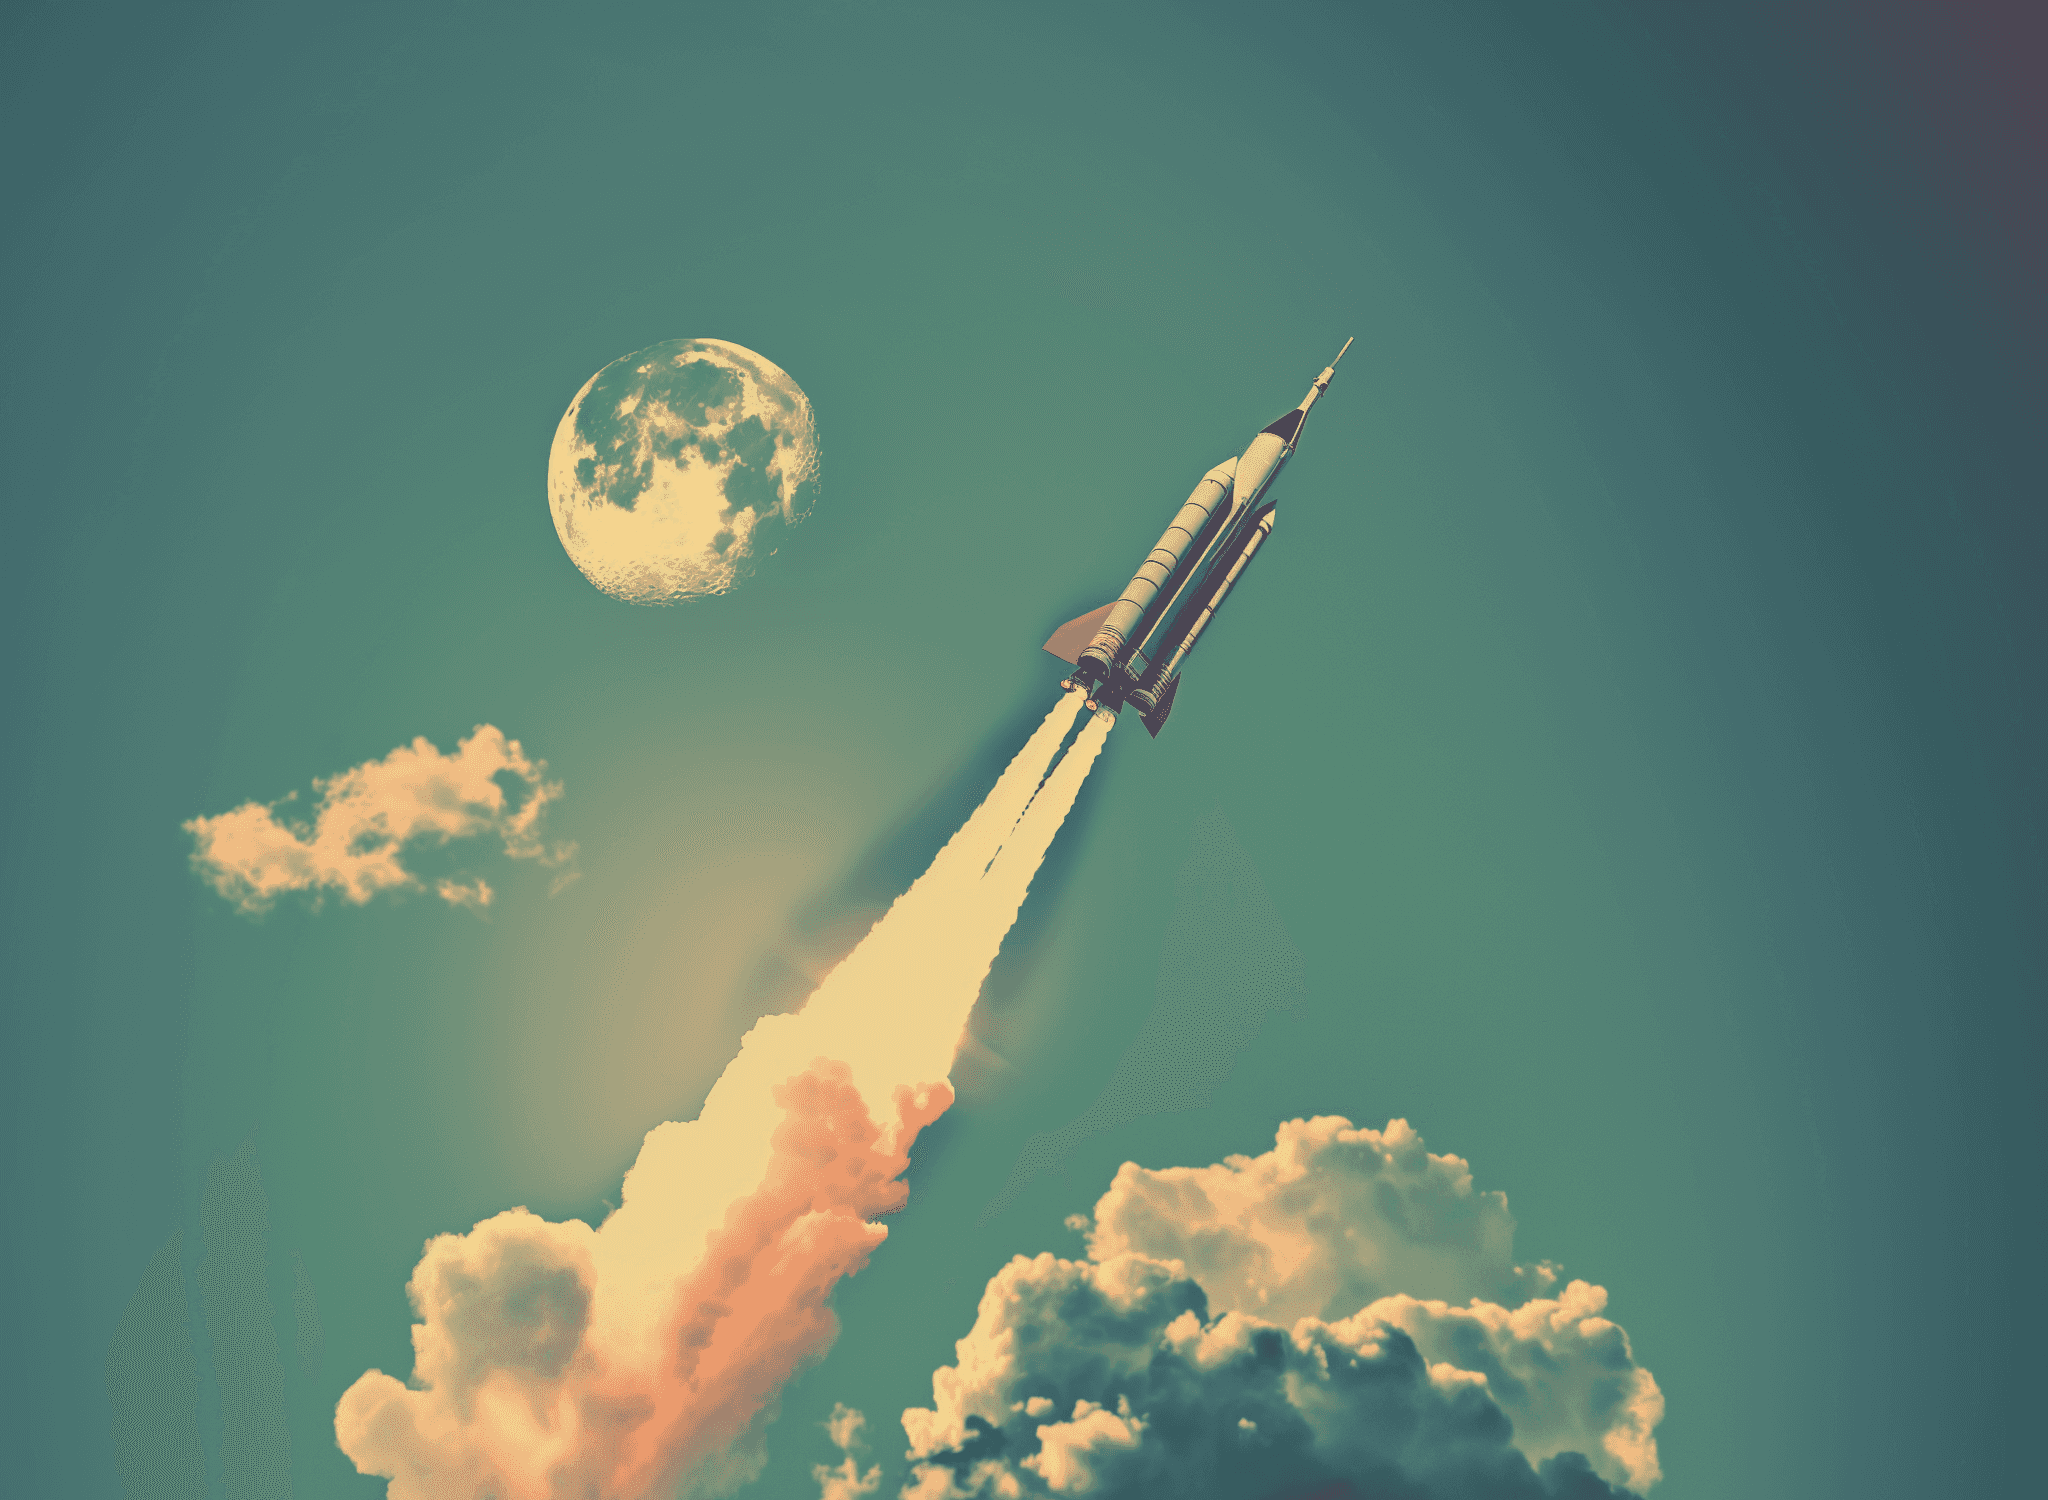 Rocket going to the moon in 1960s